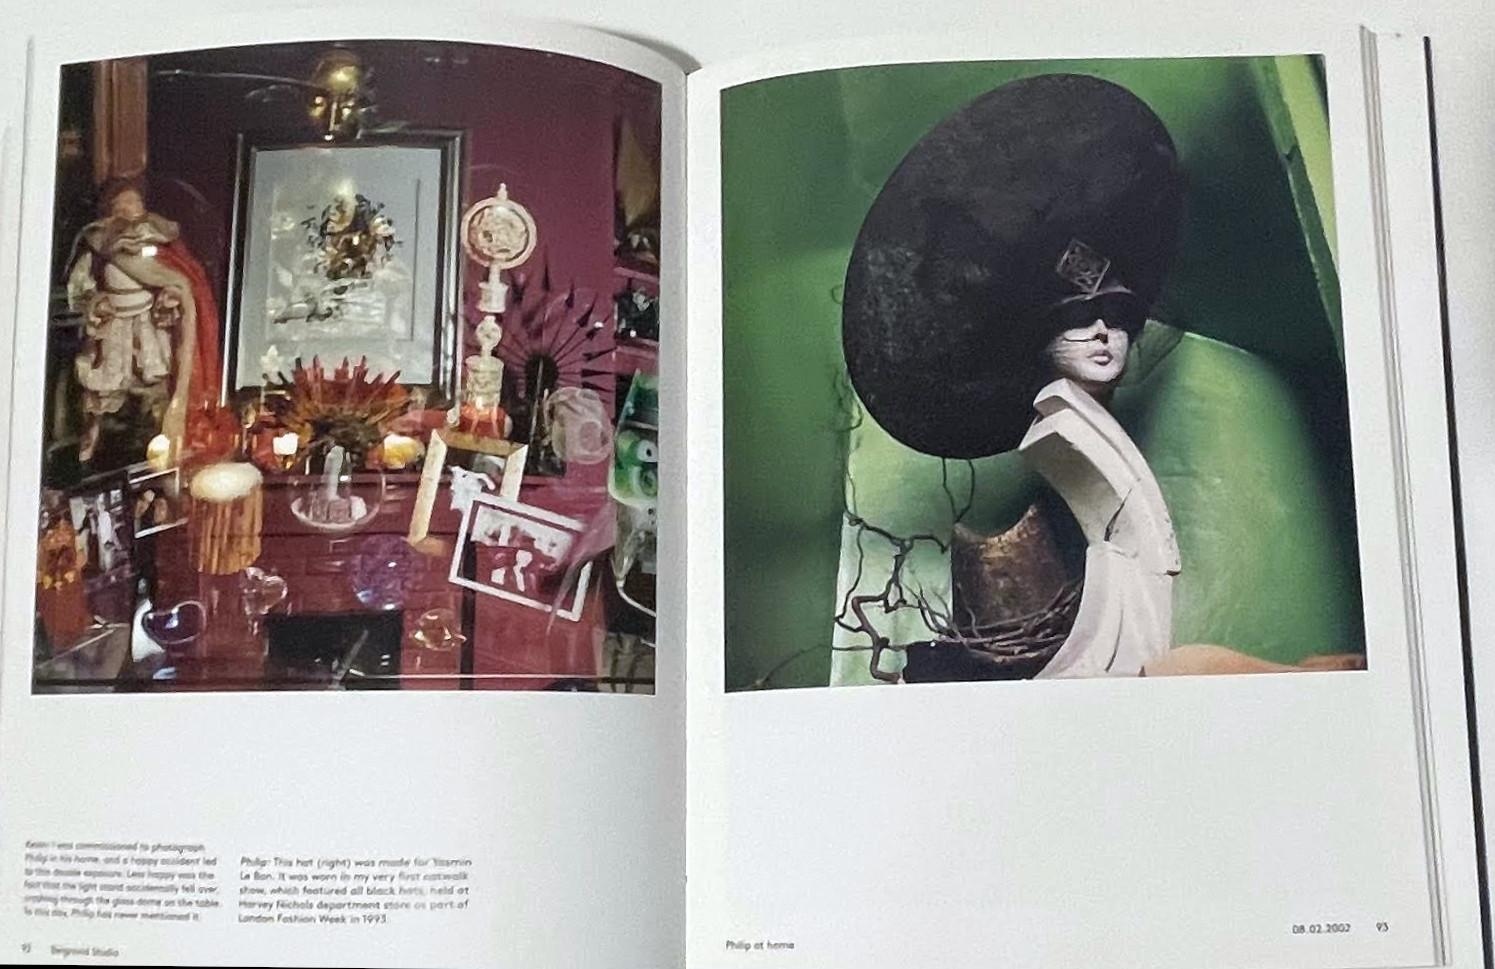 Philip Treacy hardback book (hand signed by Philip Treacy), 2013
Hardback monograph with dust jacket (hand signed by legendary milliner Philip Treacy)
hand signed by Philip Treacy on the half title page
11 × 8 1/2 × 1 inches
Hand signed by Philip